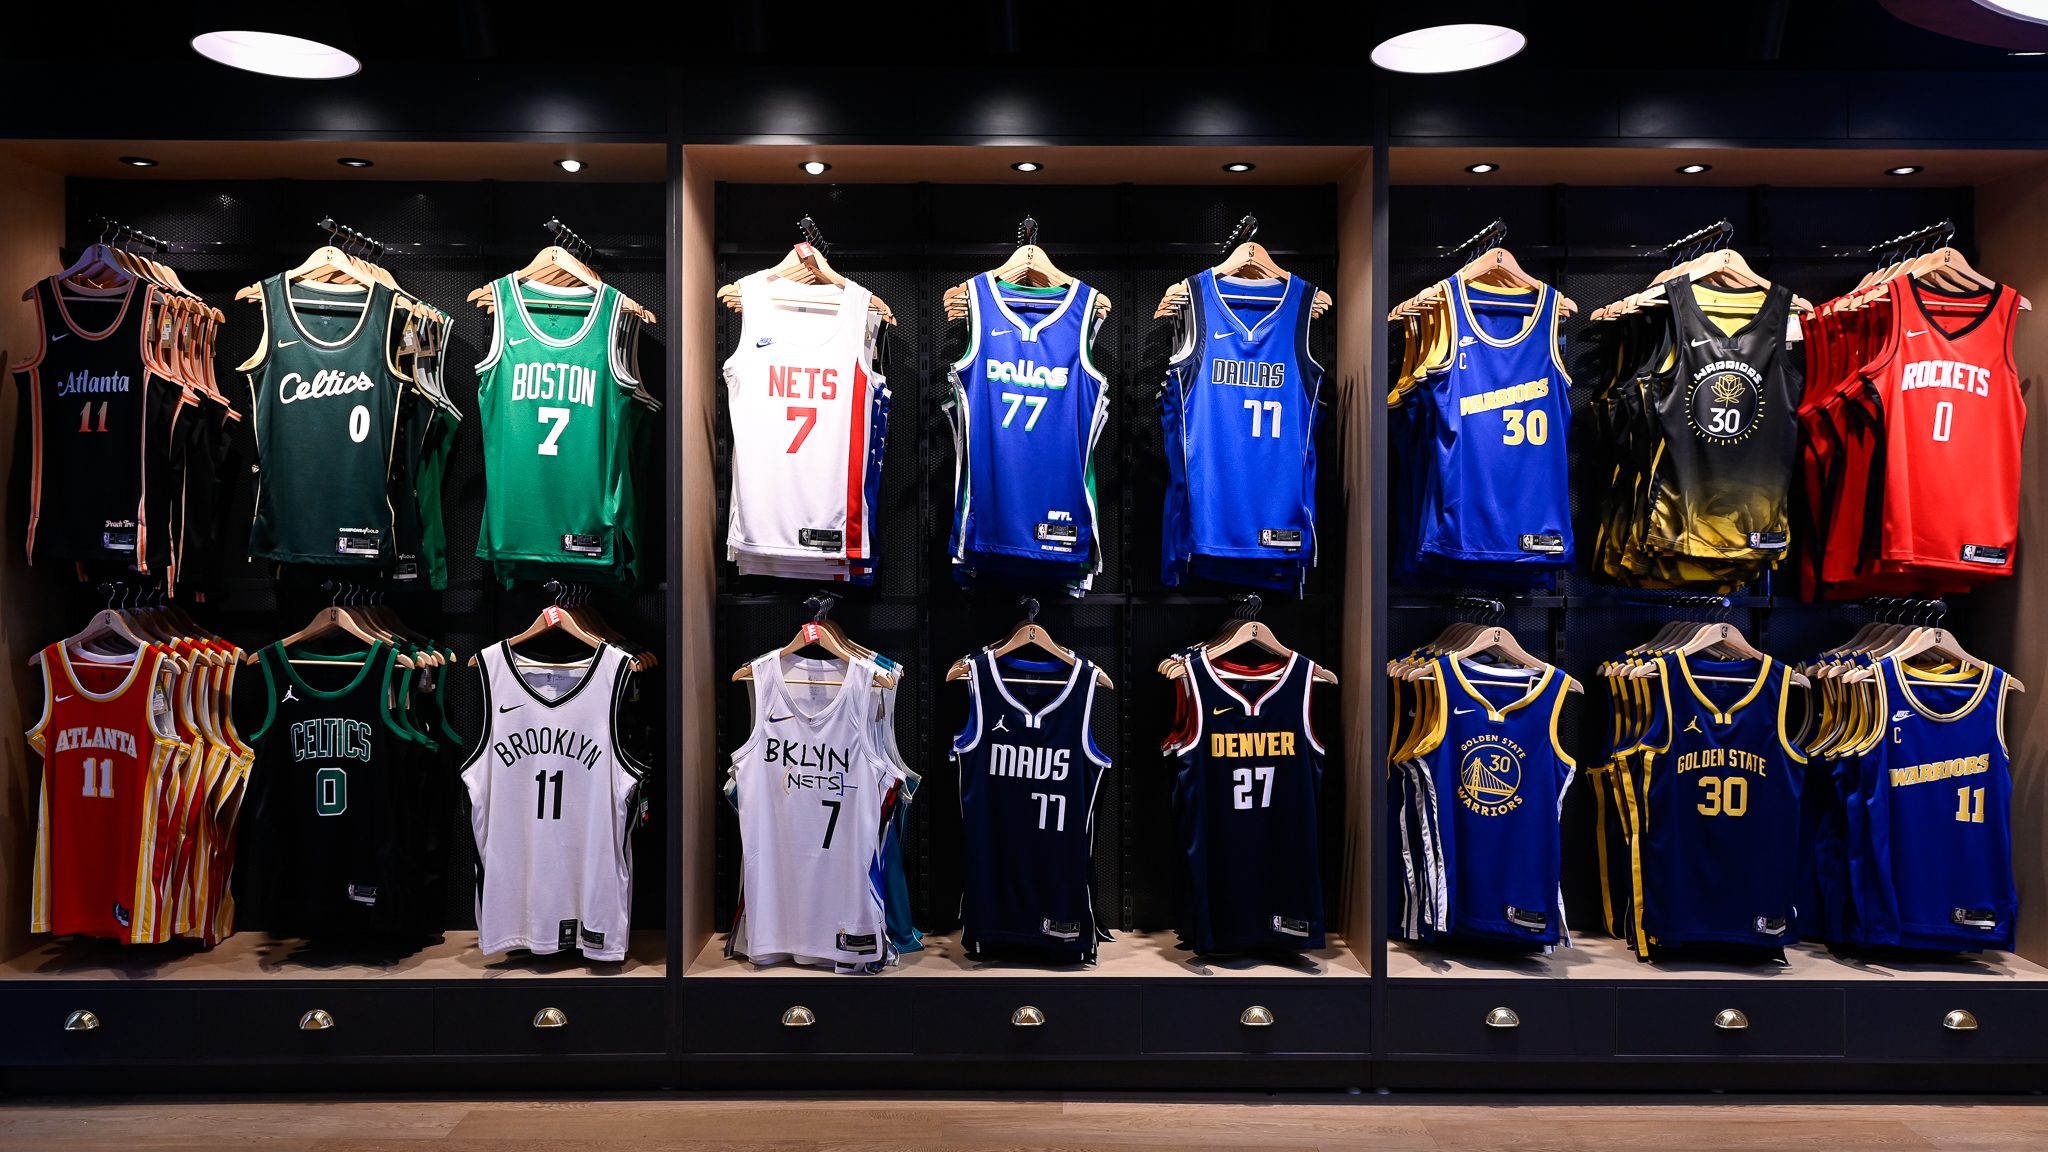 NBA Store Philippines (@nbastoreph) • Instagram photos and videos